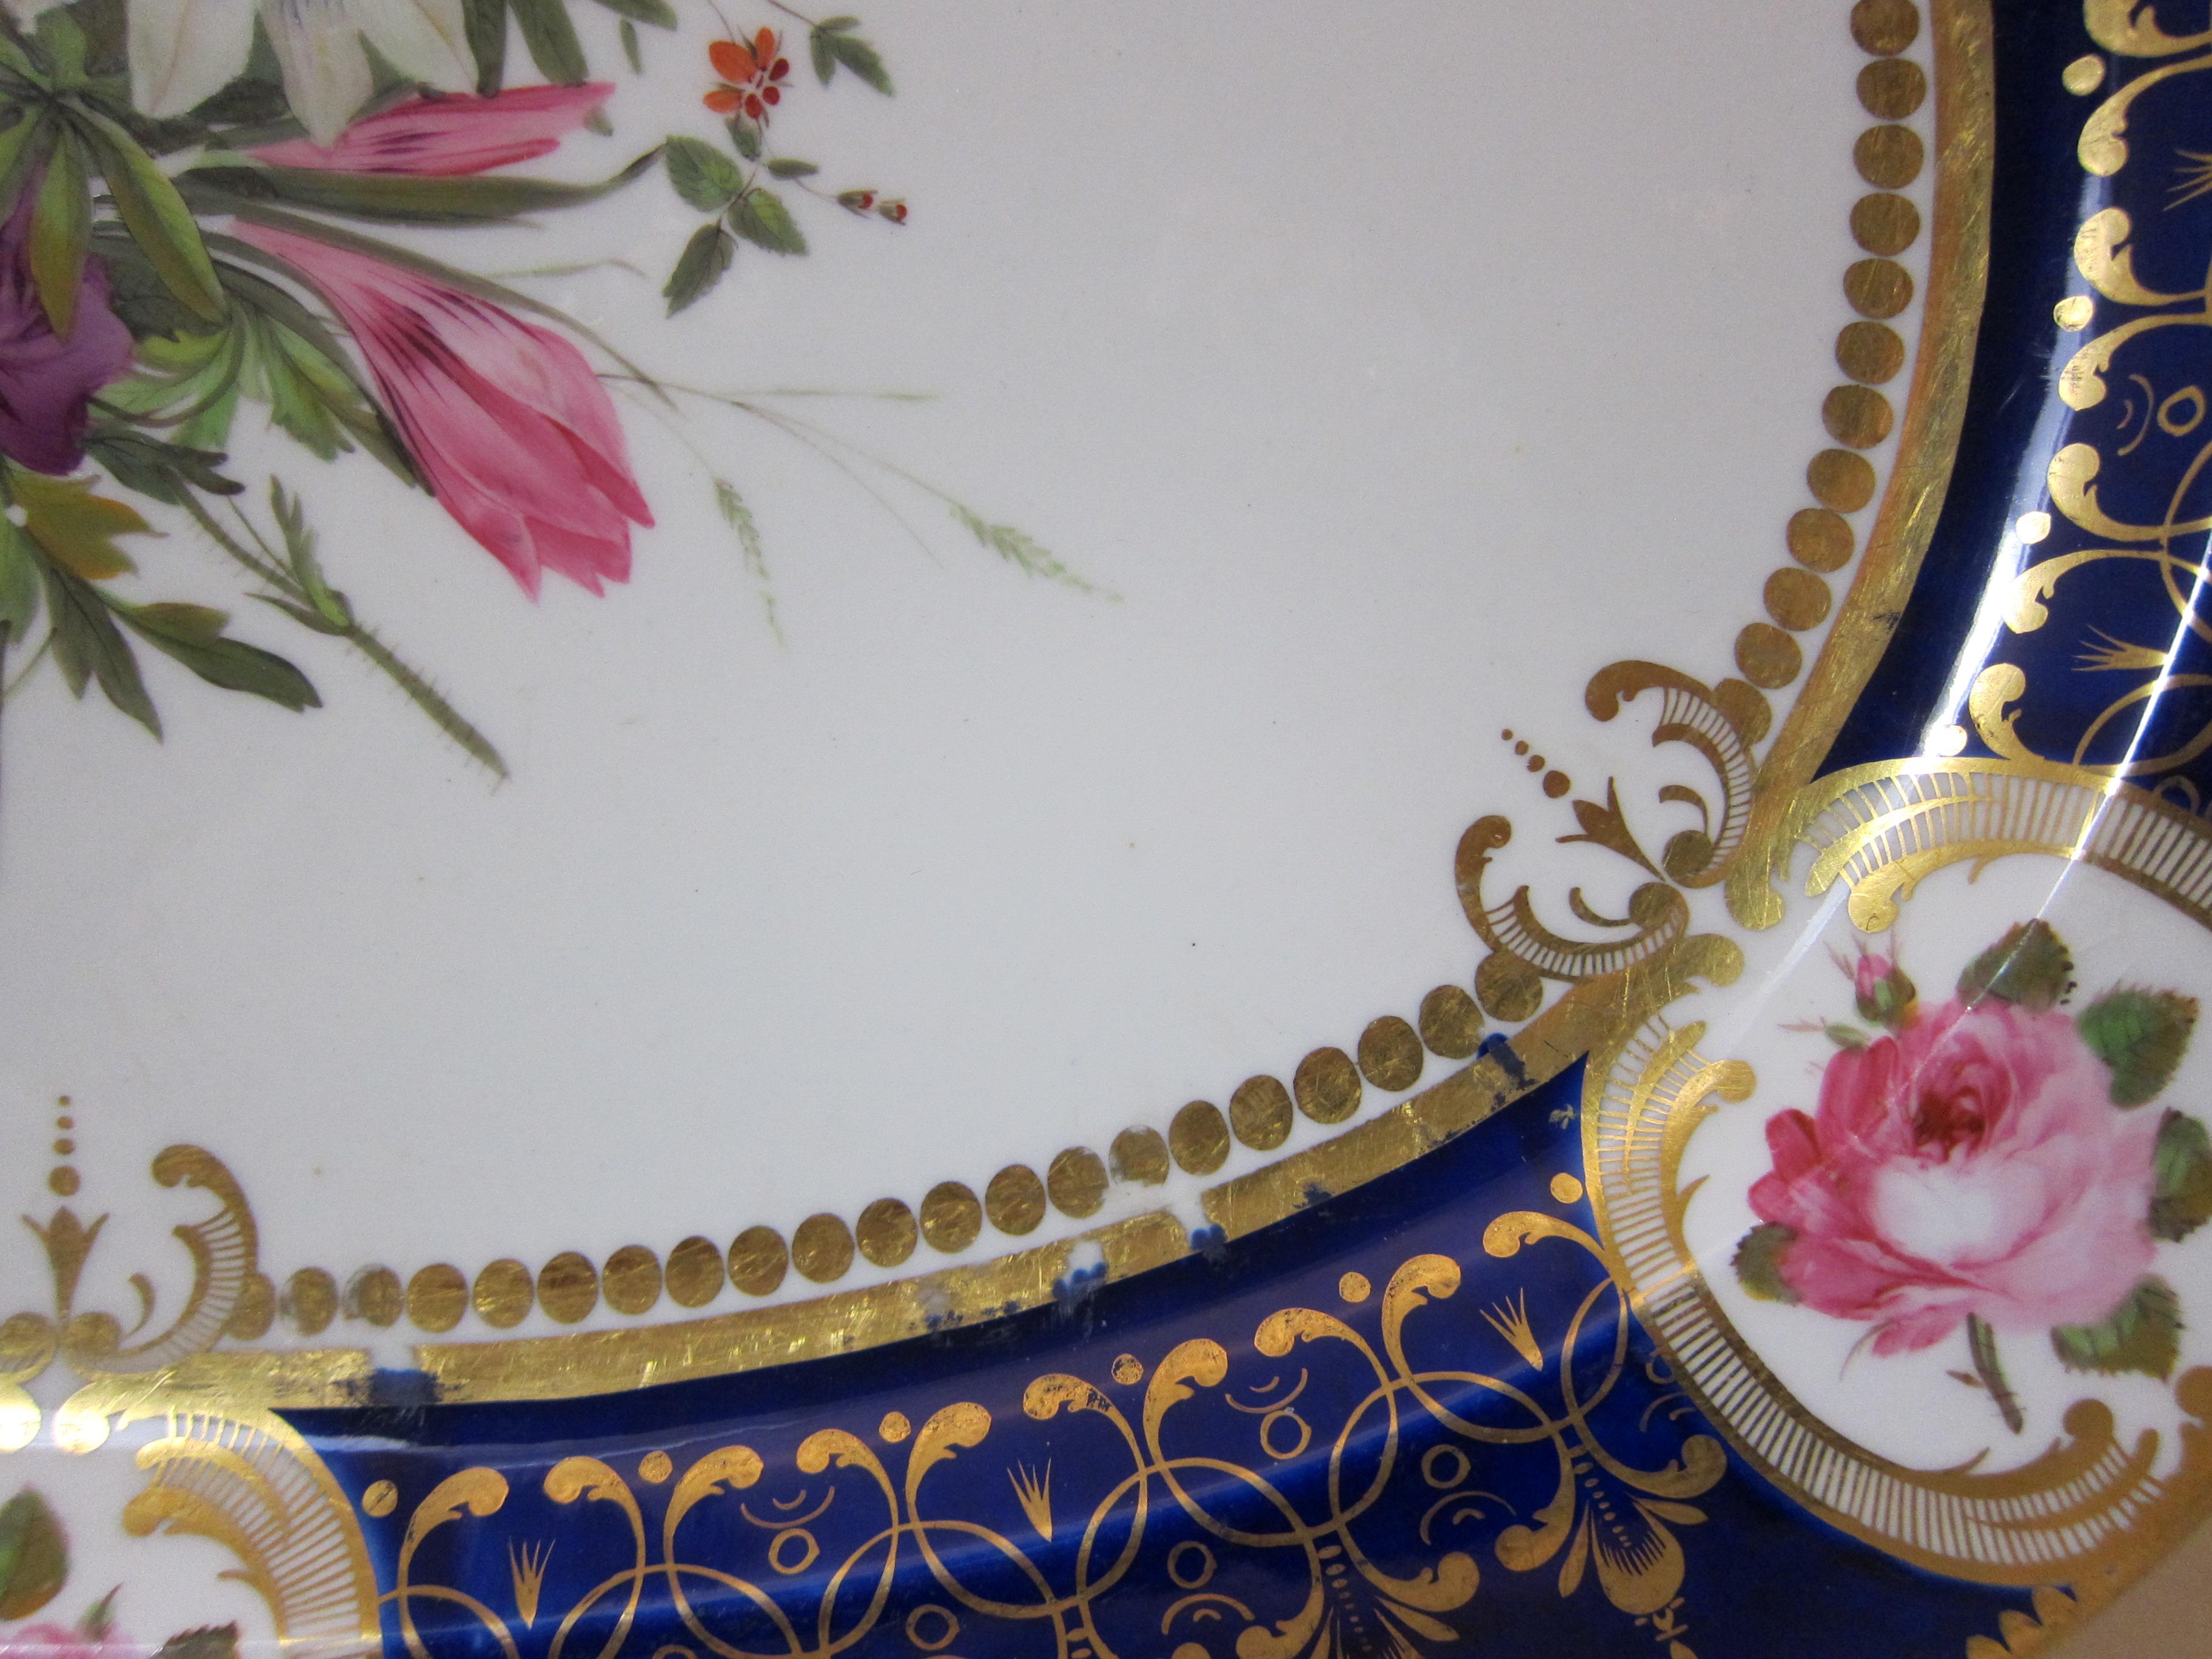 George III Chamberlain Worcester Antique Porcelain Hand-Painted Floral Platter